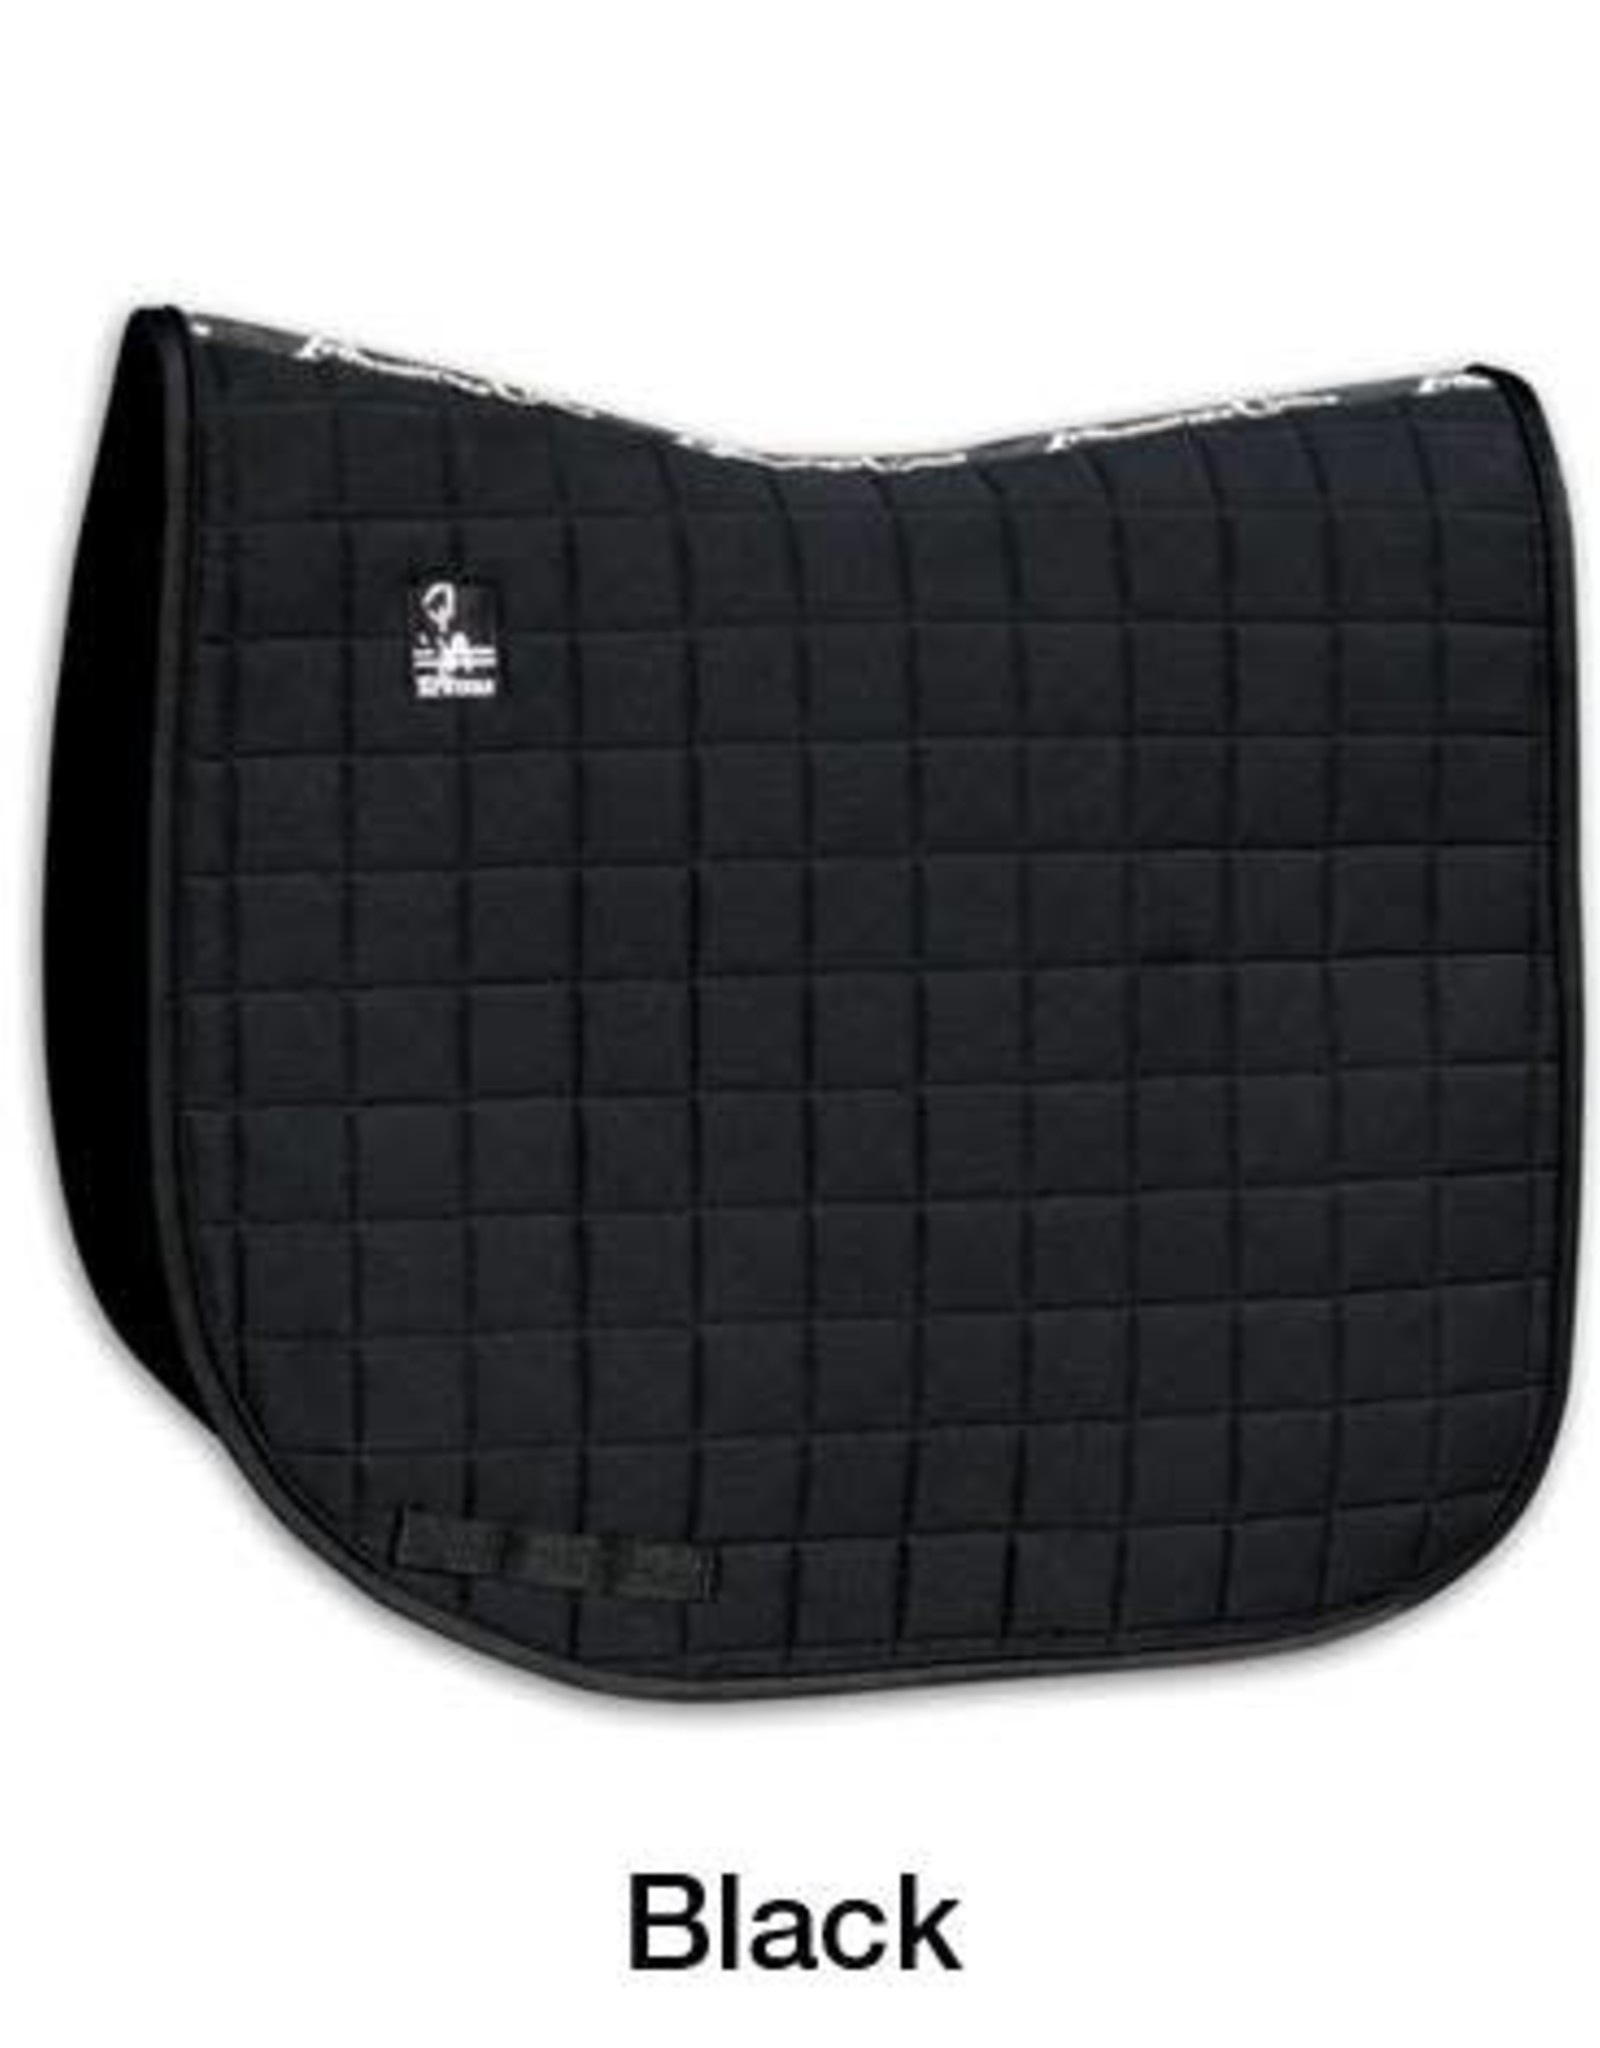 PROFESSIONAL'S CHOICE STEFFEN PETERS DRESSAGE SHOW PAD